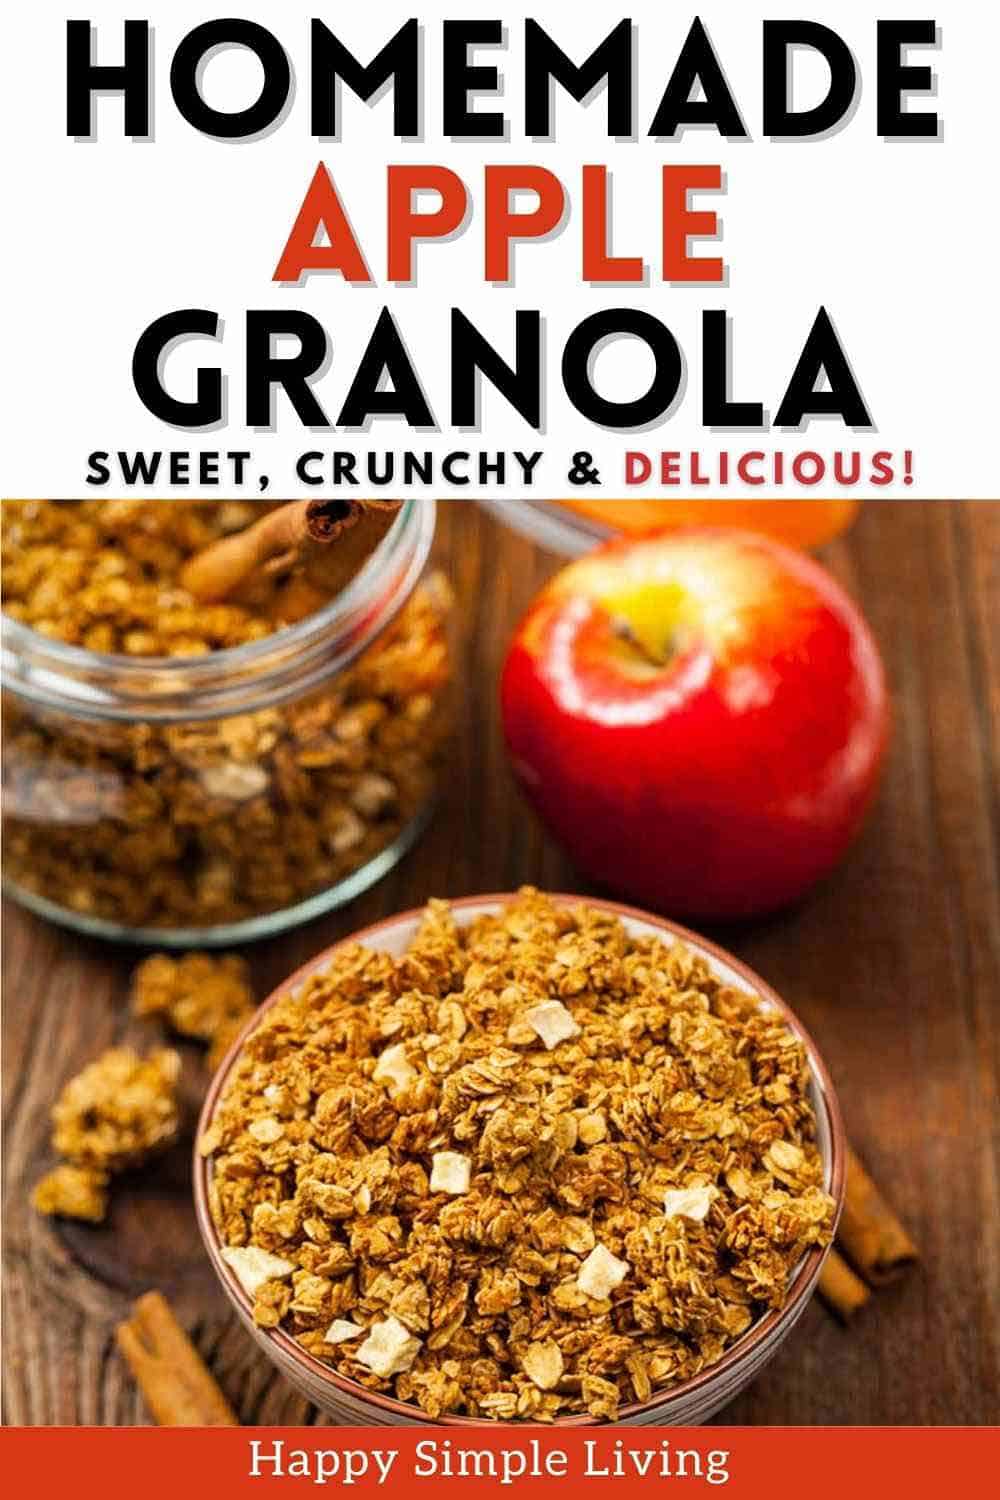 A bowl and jar of homemade apple granola and a fresh apple.